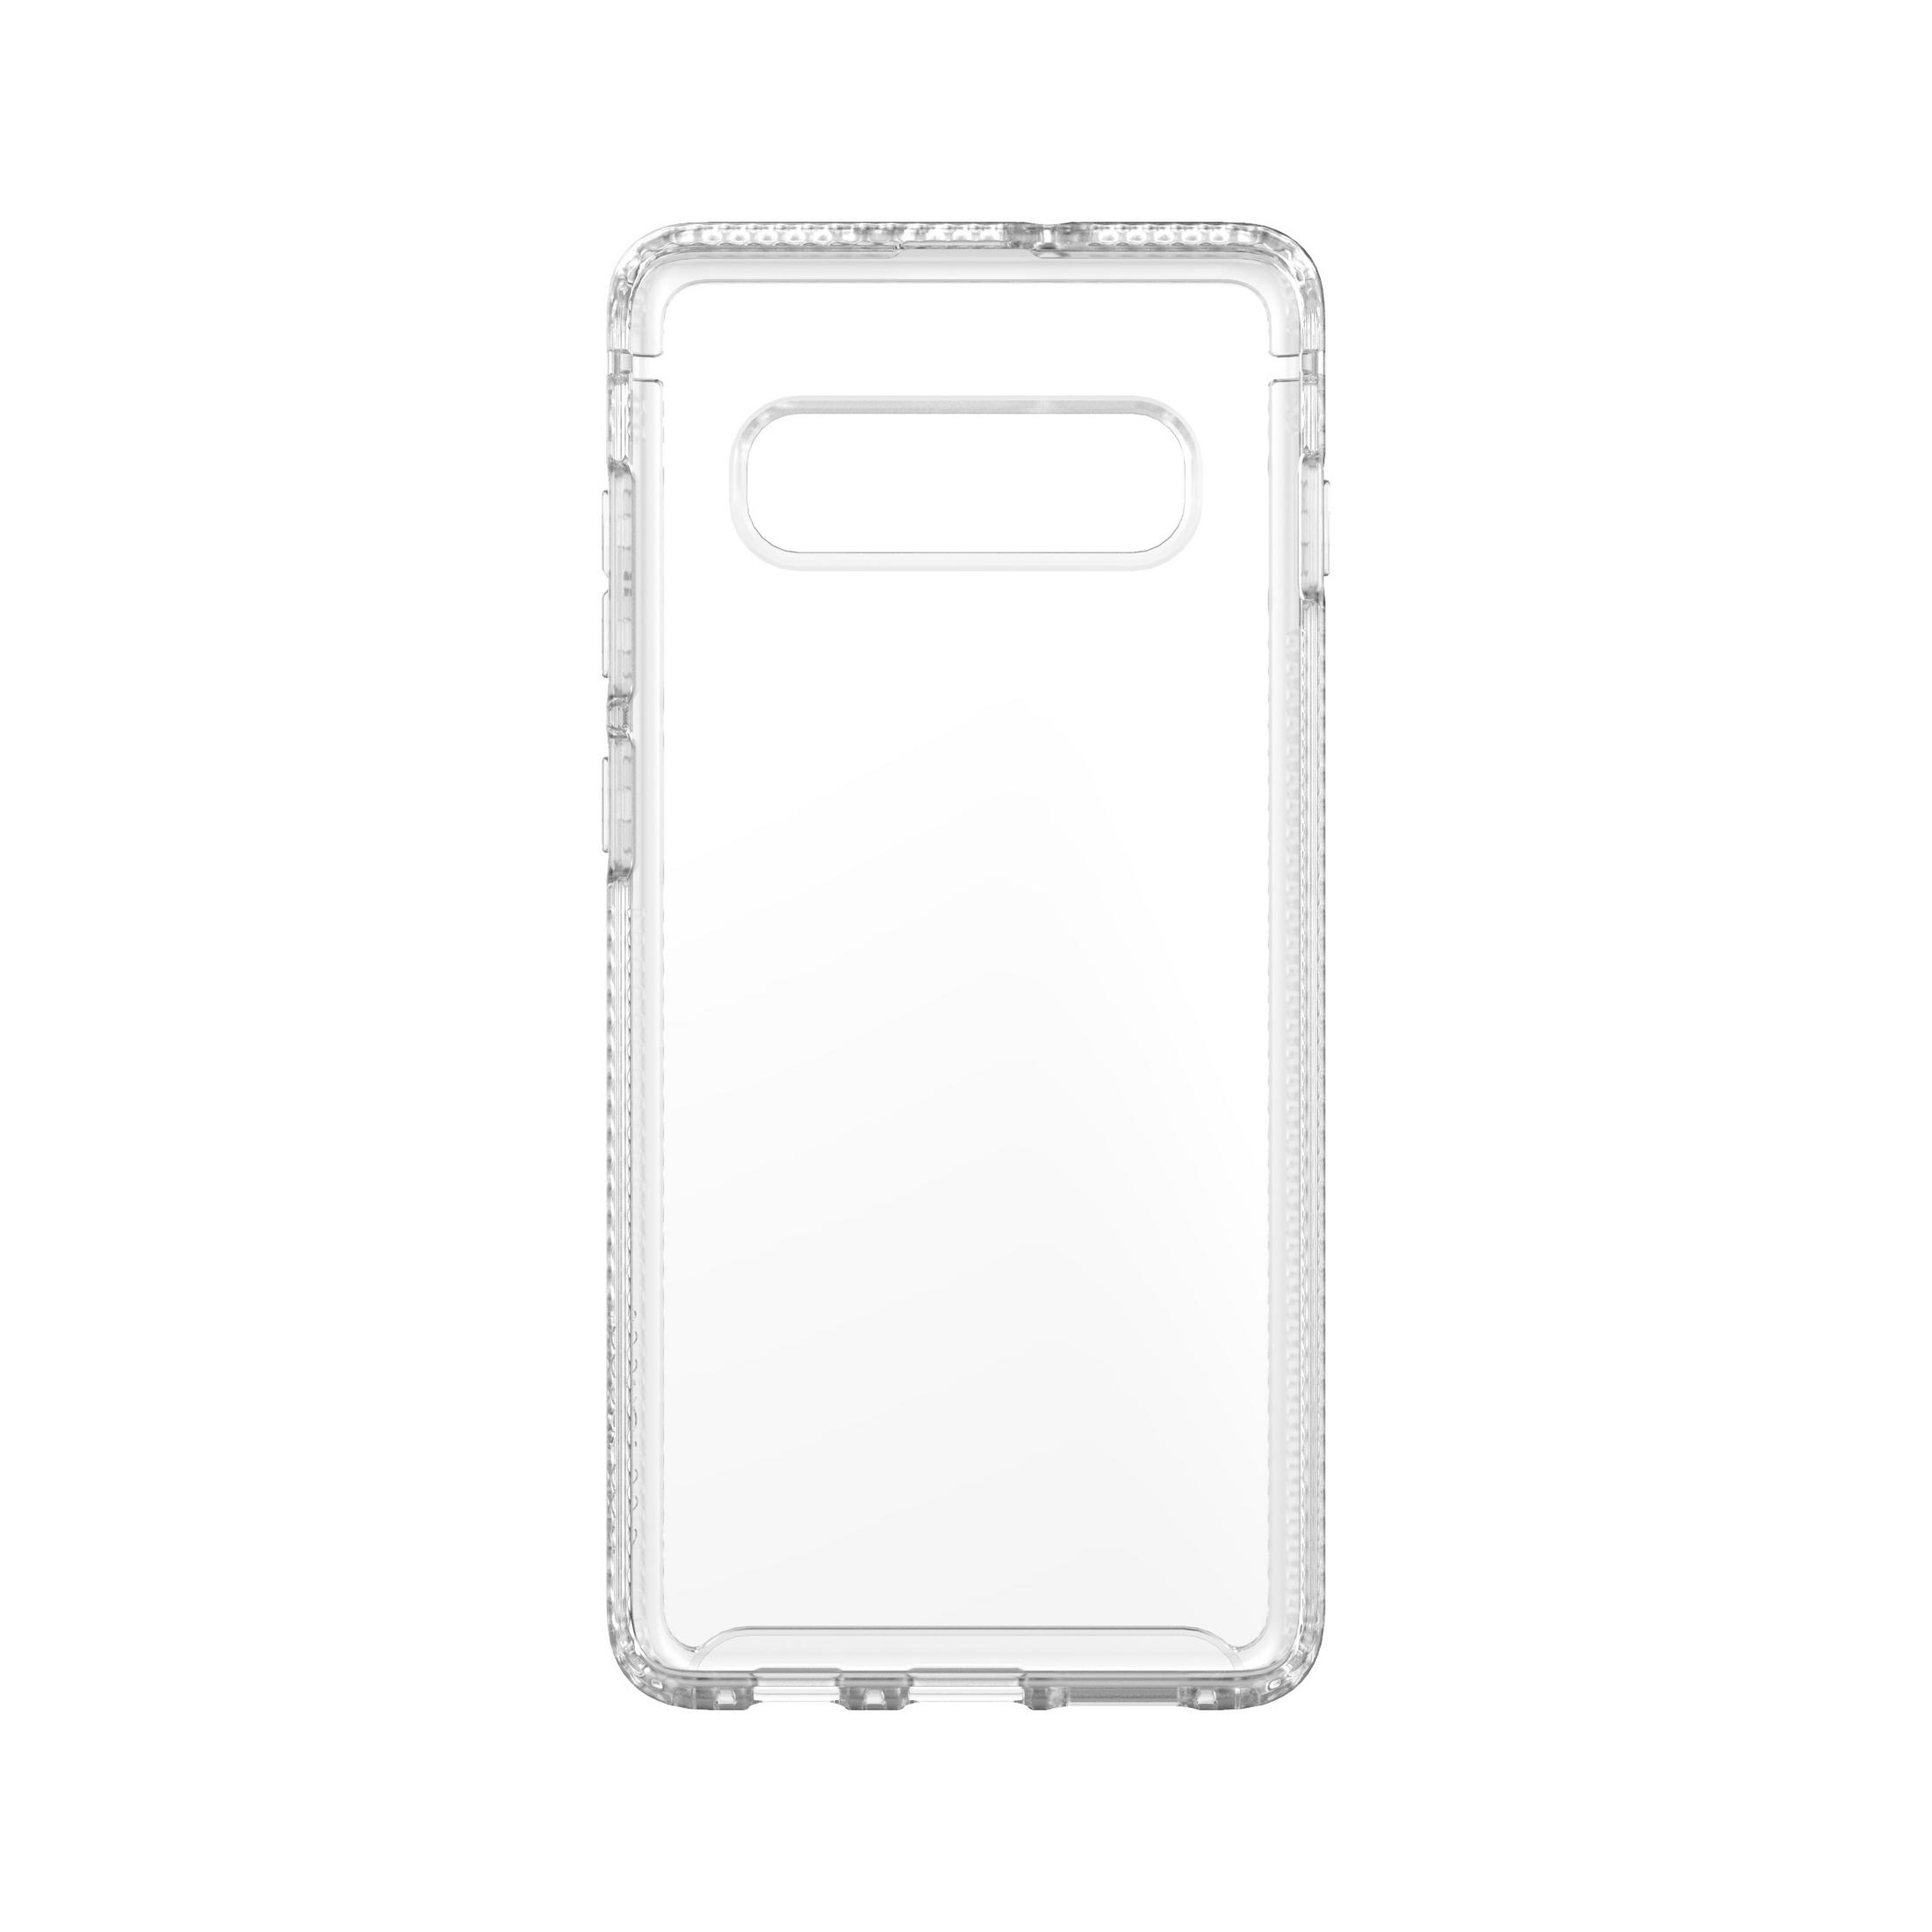 TECH21 T21-6943 PURE Transparent Backcover, S10+, CLEAR Galaxy S10+ SAMSUNG Samsung, CLEAR